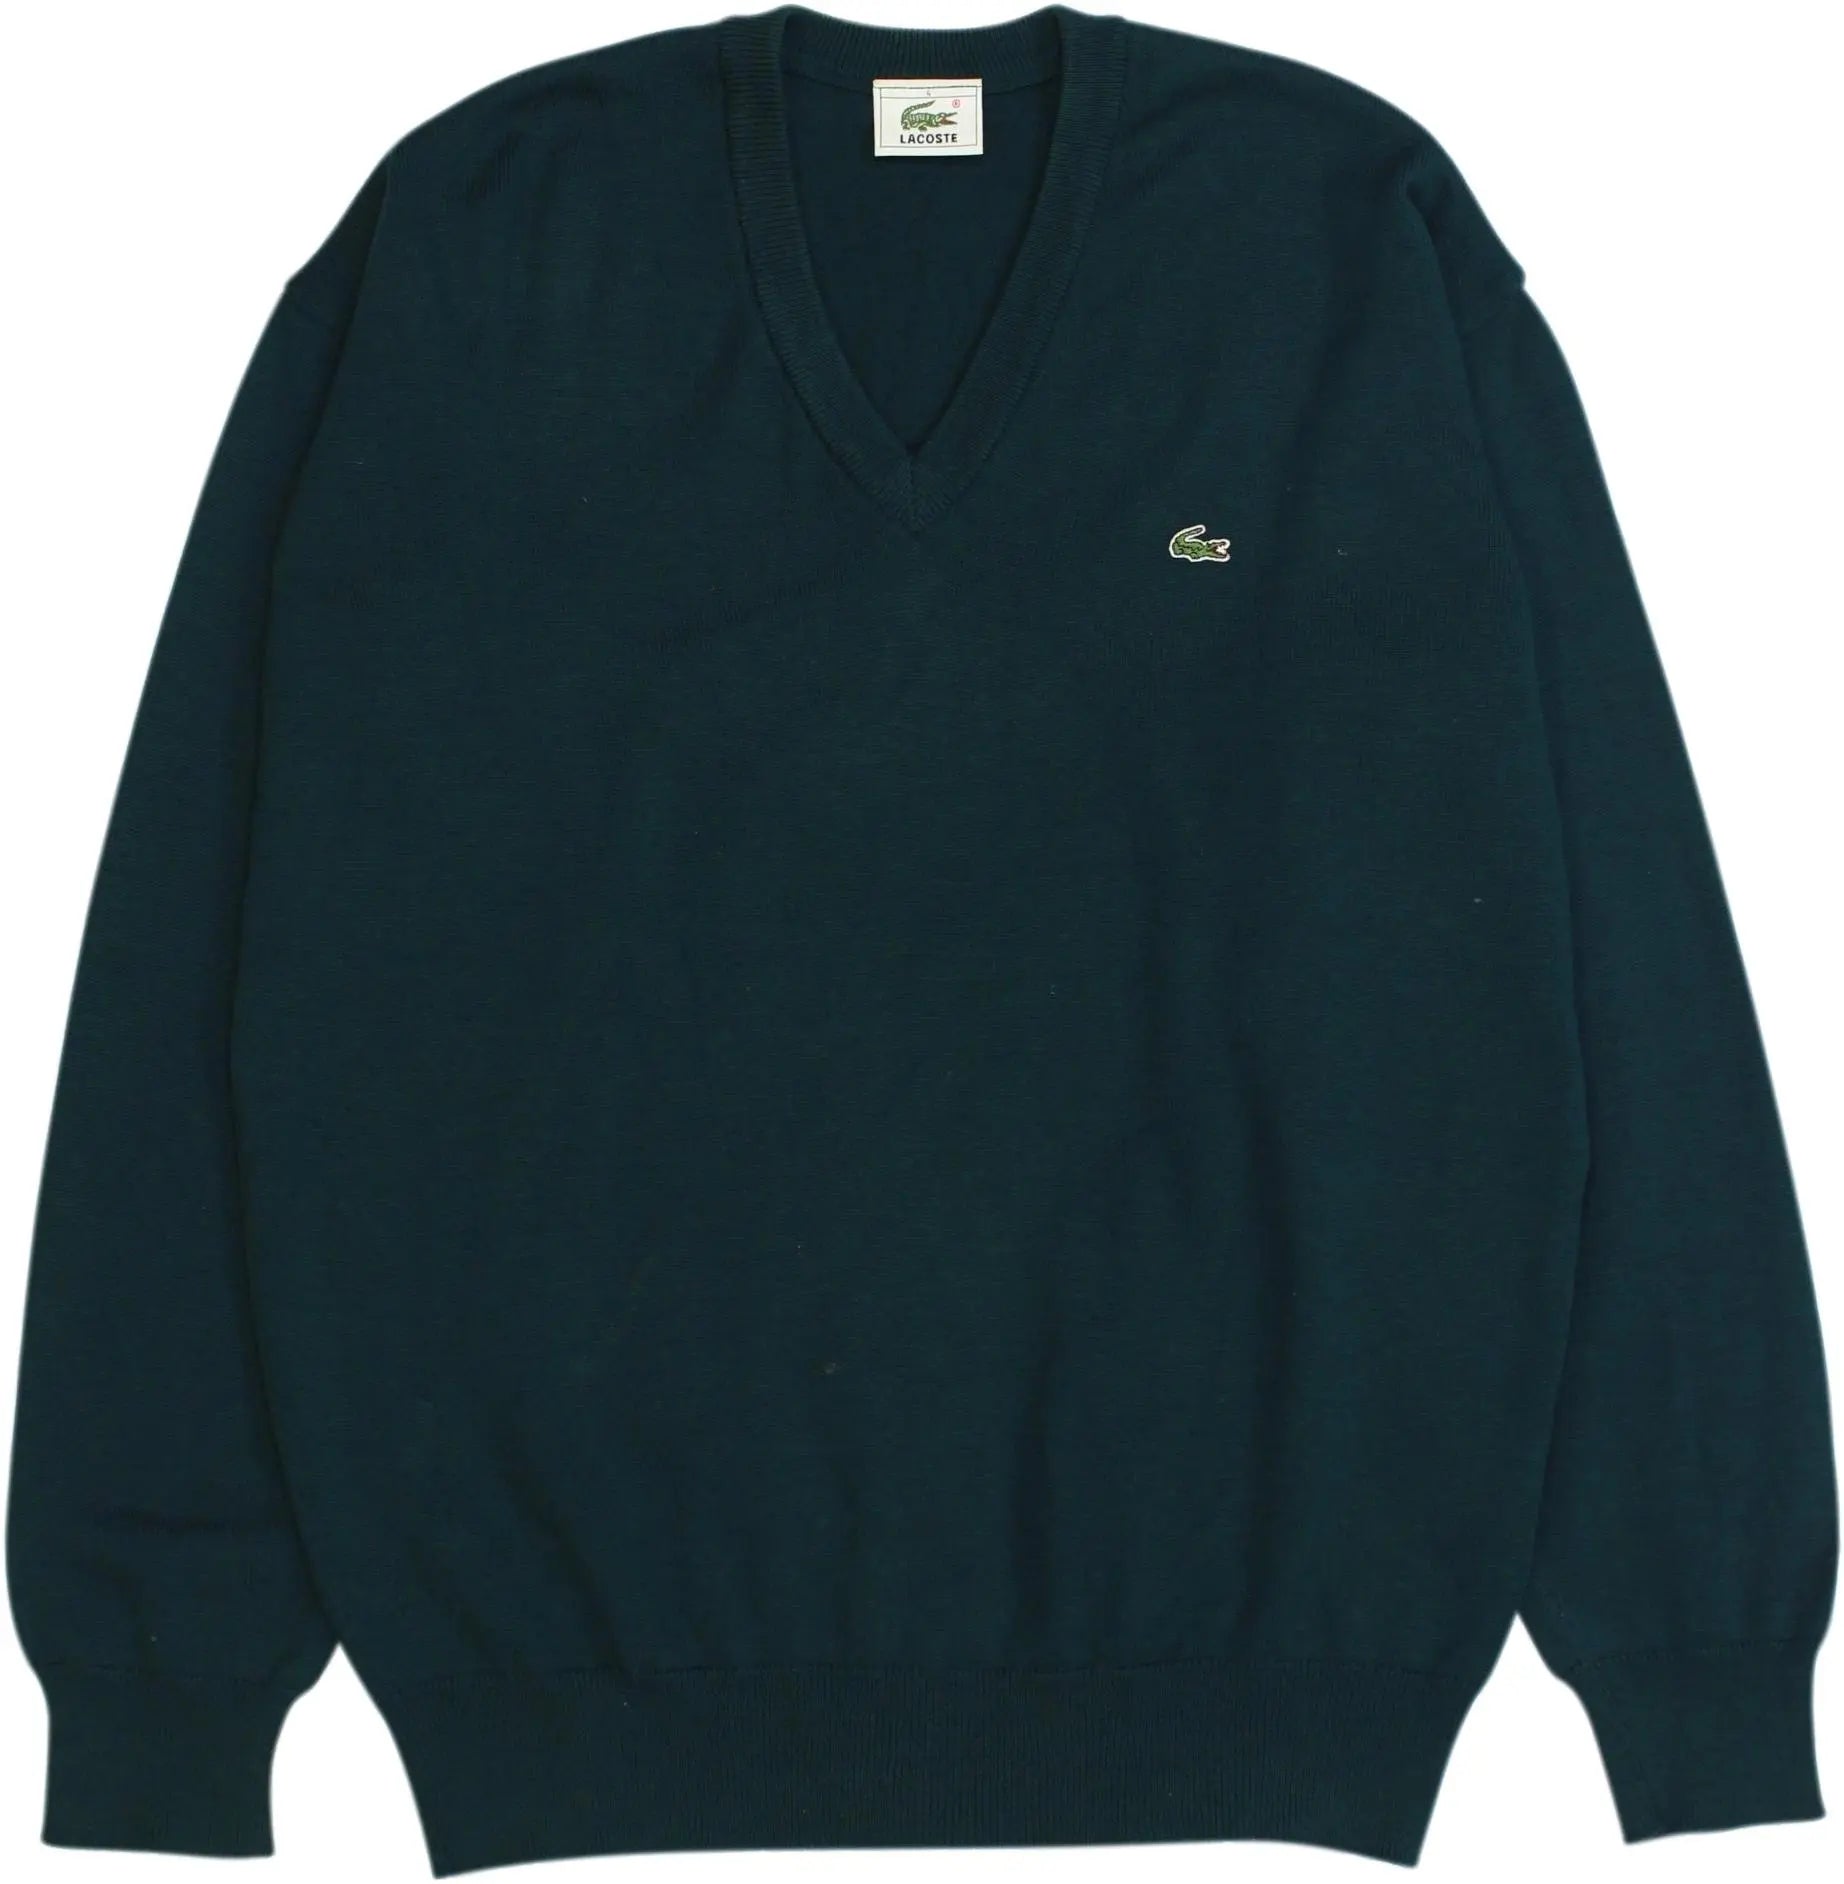 Lacoste - Vintage Green V-Neck Sweater by Lacoste- ThriftTale.com - Vintage and second handclothing